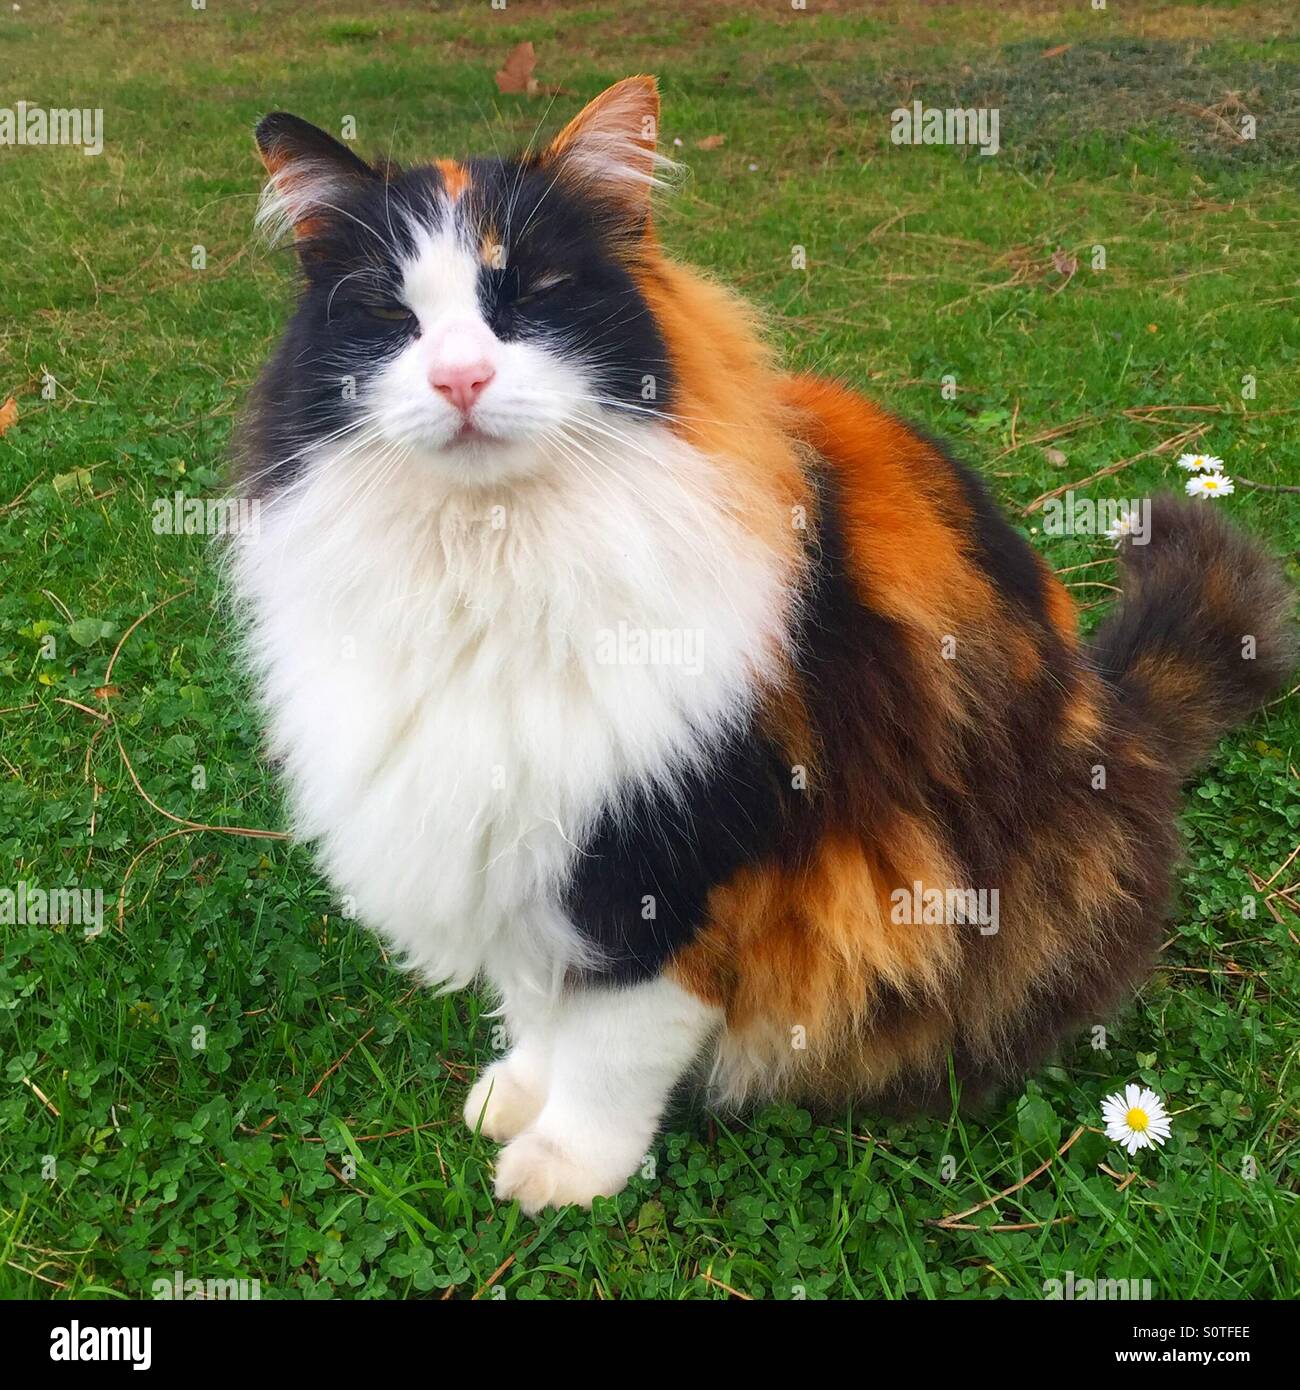 Cat with long fur Stock Photo